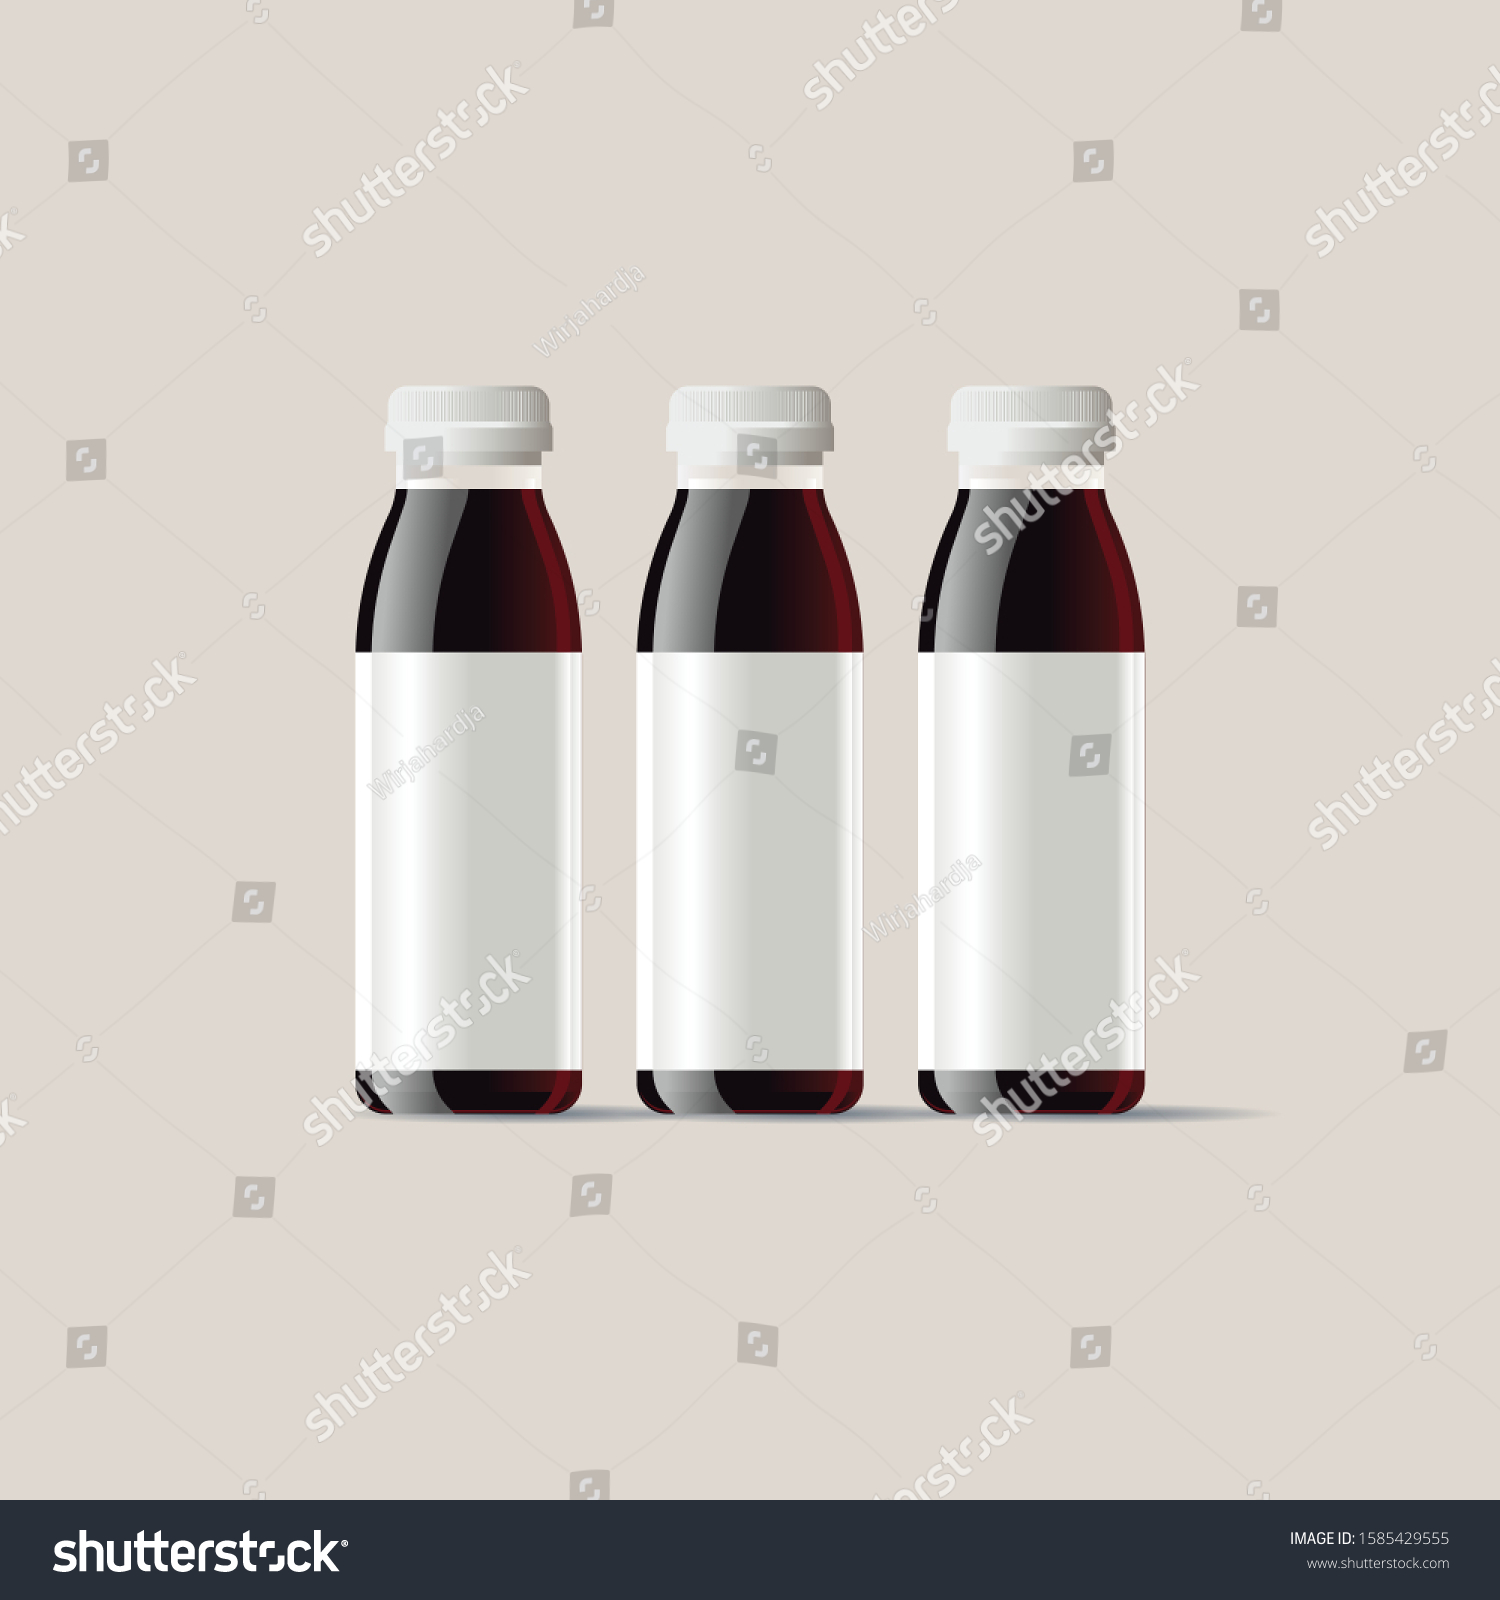 Download Ice Coffee Bottle Mockup Cold Brew Stock Vector Royalty Free 1585429555